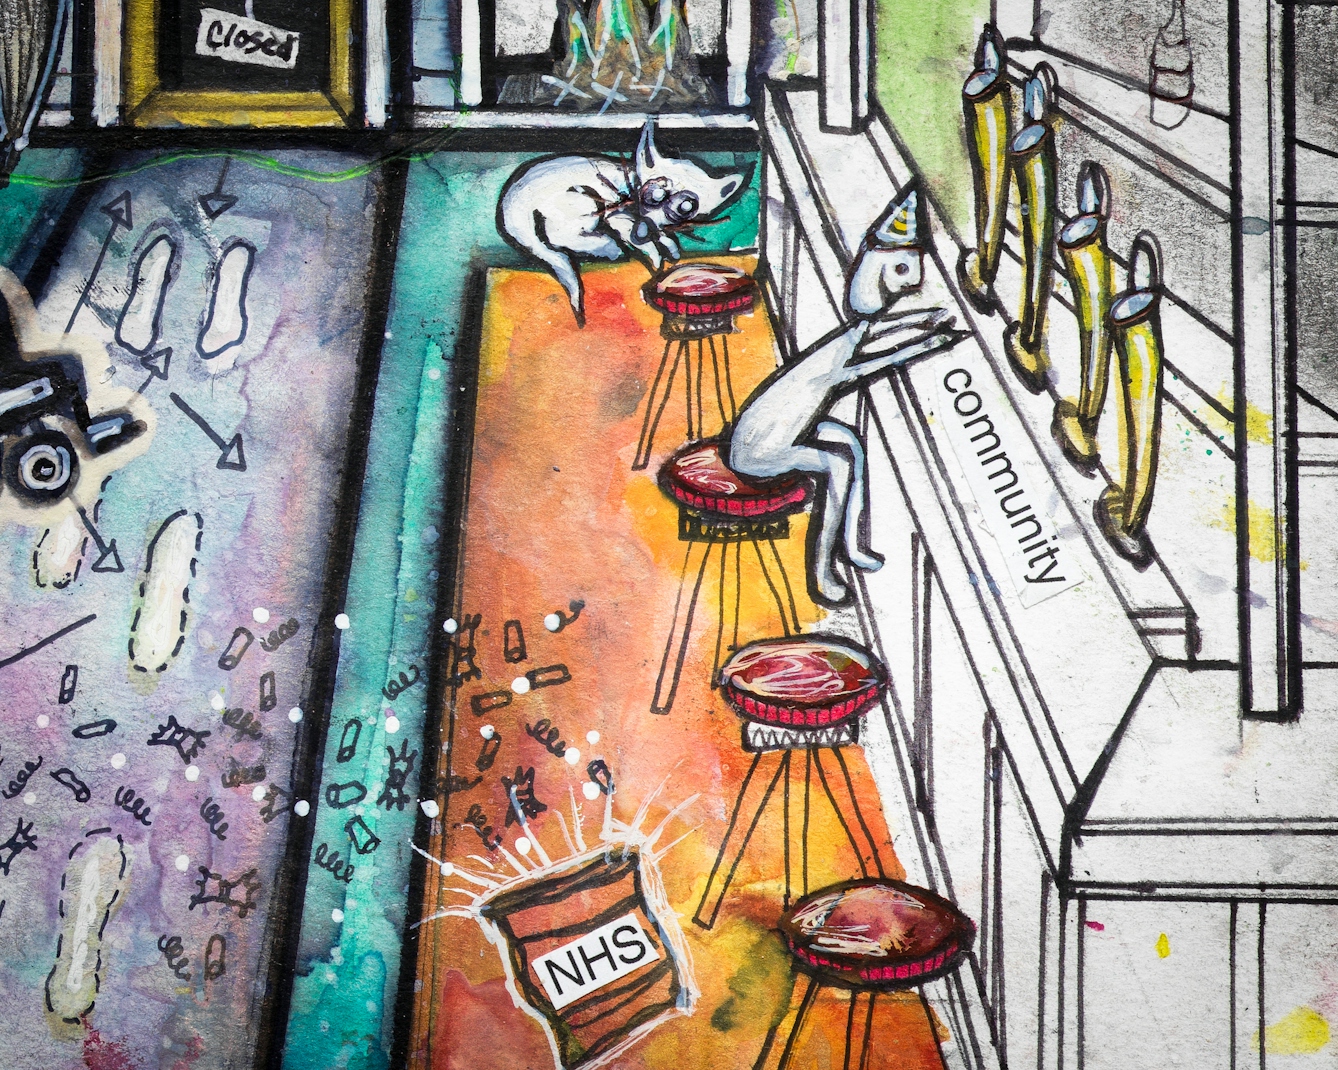 Artwork using watercolour and ink incorporating collaged words throughout the scene. The artwork shows a busy multi-coloured room. On the right hand side of the image is a bar, including someone sitting on one of the bar stools, and a packet of NHS crisps exploded on the floor. On the bar is the word ‘community’.  On a pathway along which arrows dart in different directions, stands a wheelchair, this separates the bedroom scene from the bar scene.